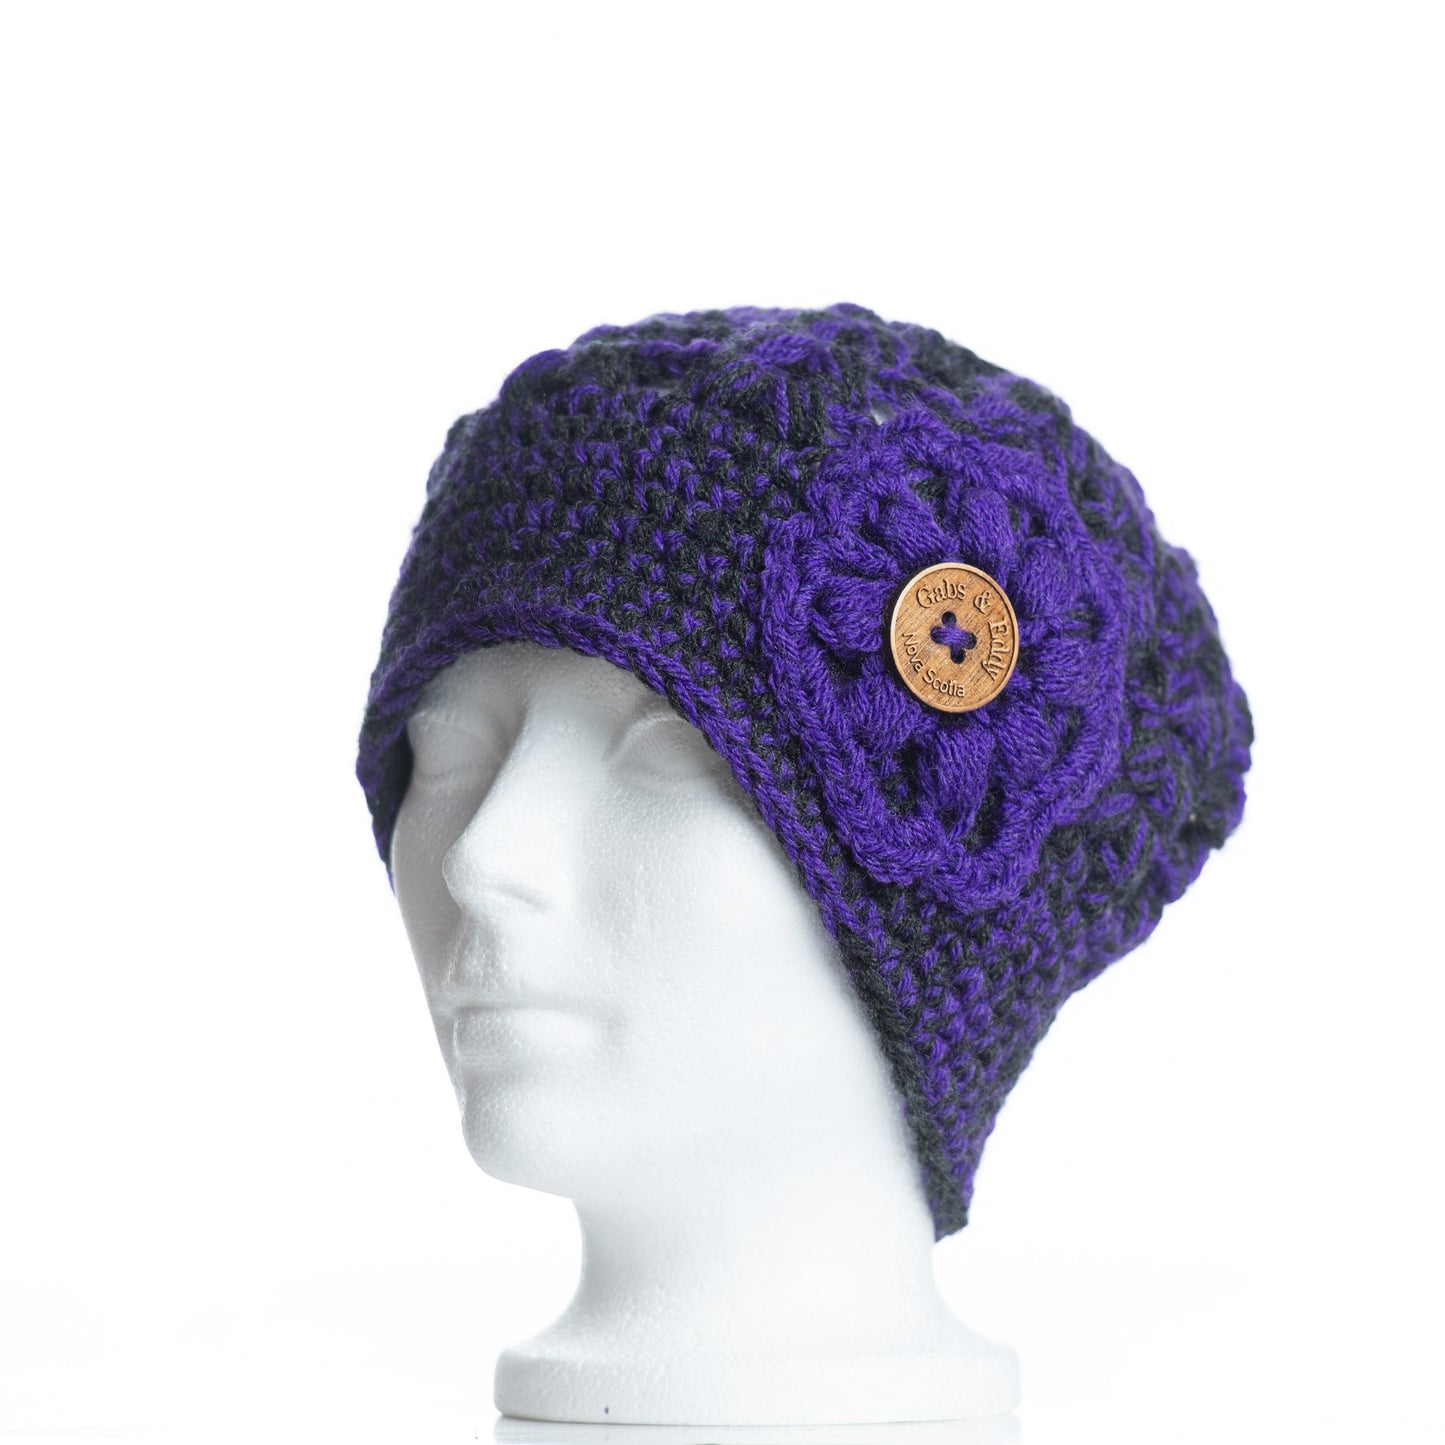 Tortoise Shell Beanie in Electric Purple and Dark Grey Heather with Electric Purple Flower